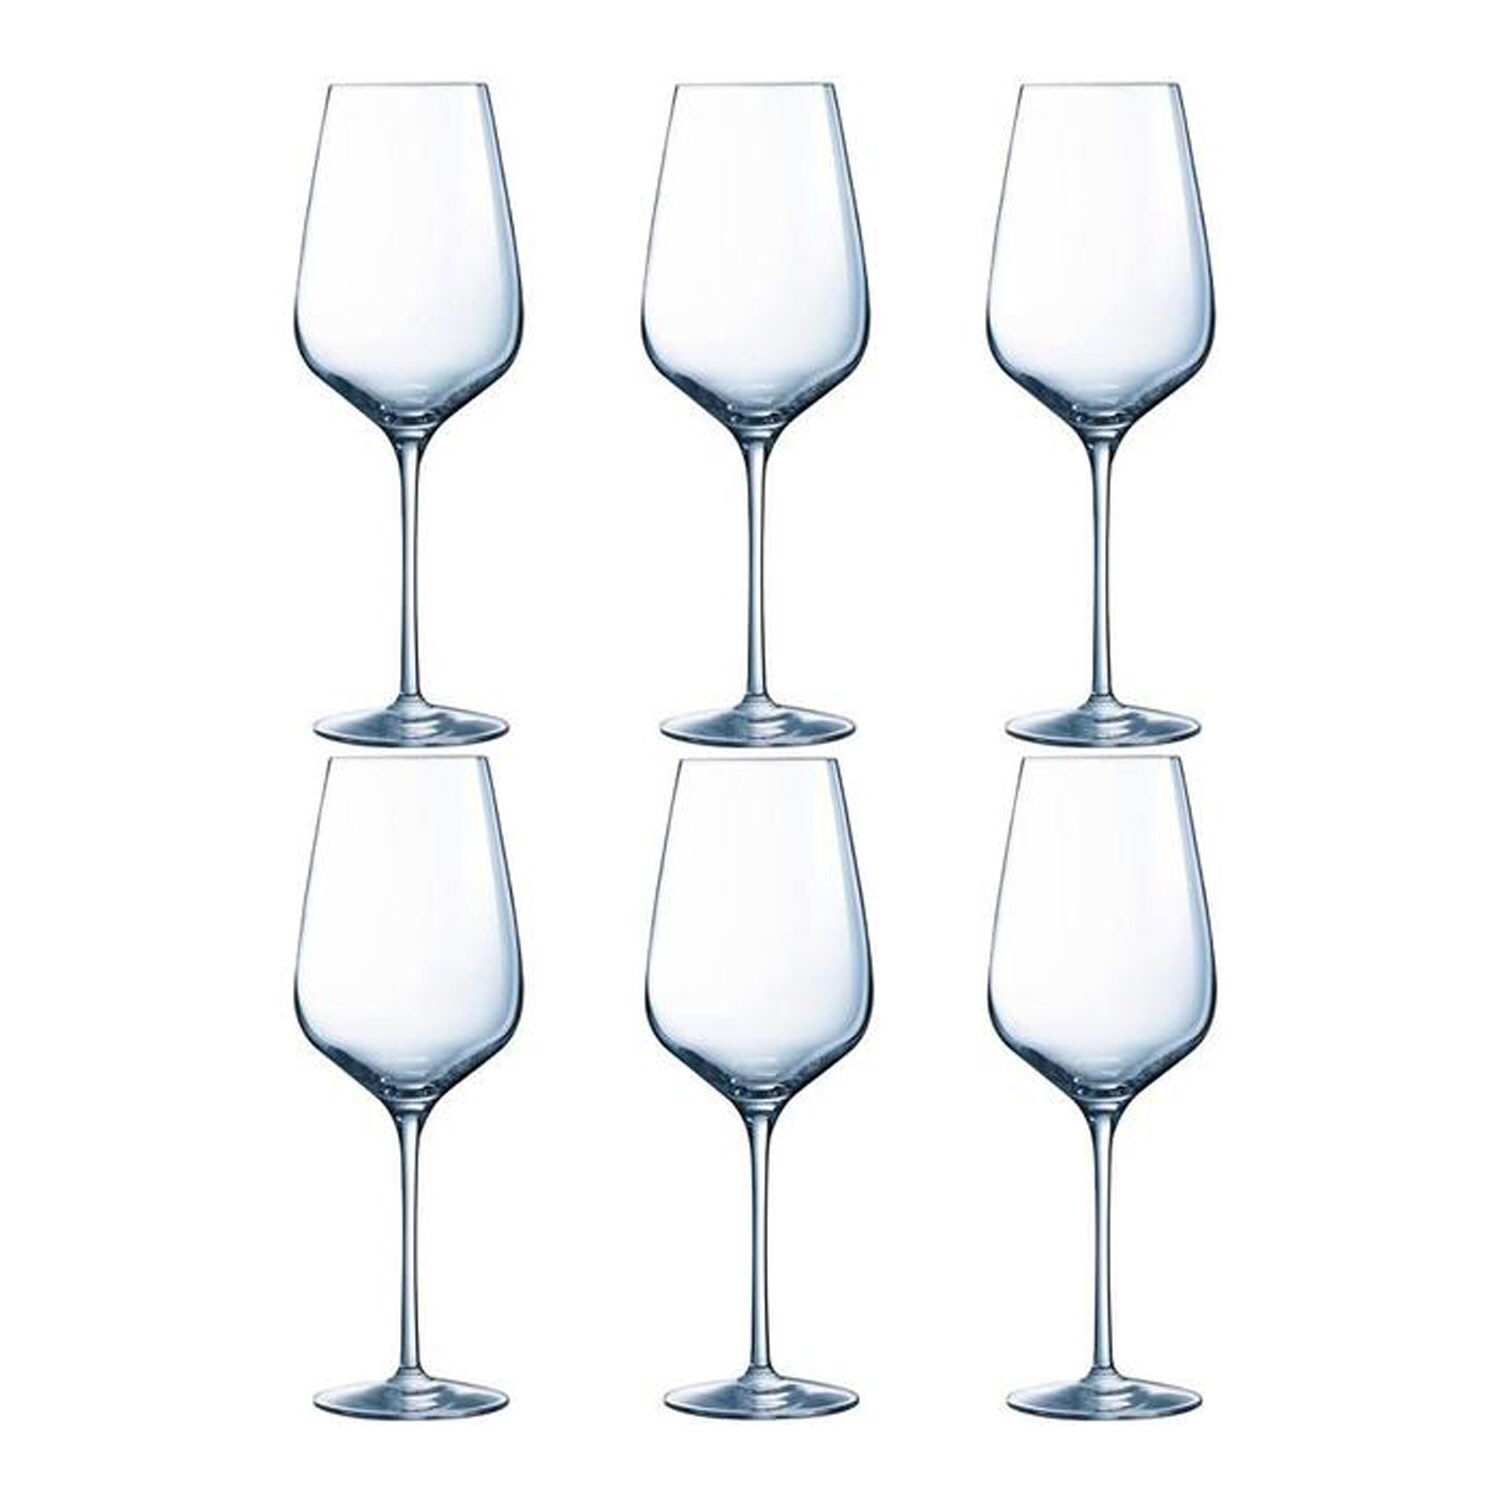 Sublym White Wine Glasses 25cl, 6-Pack - Chef & Sommelier